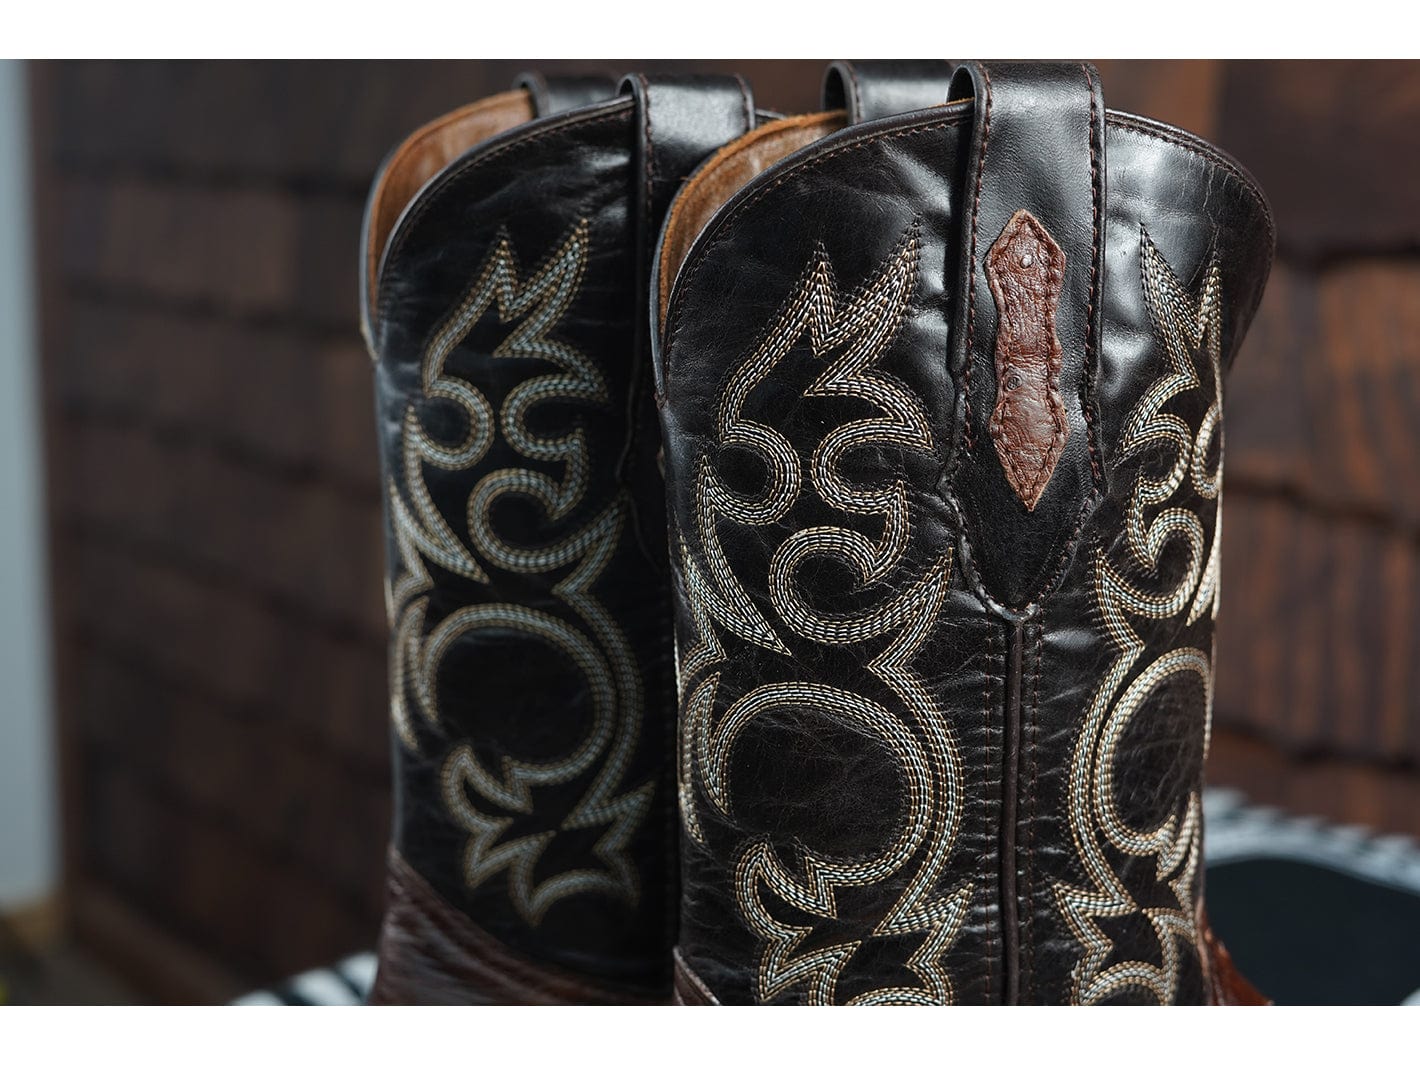 Texas Country Exotic Boot Ostrich Tabaco PS Tacoma